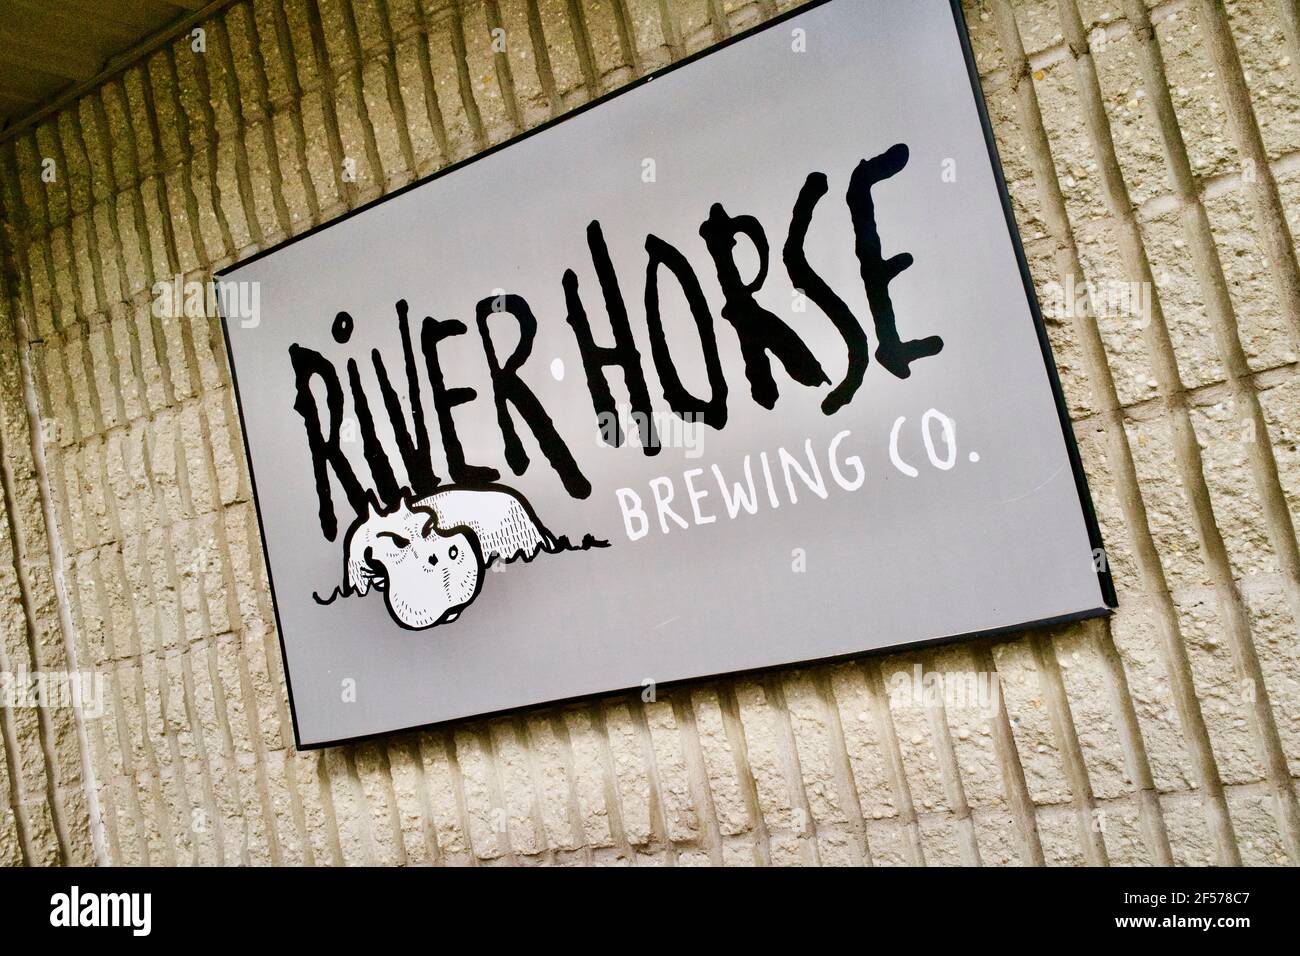 Sign at the River Horse Brewing Co. in Ewing, NJ USA Stock Photo